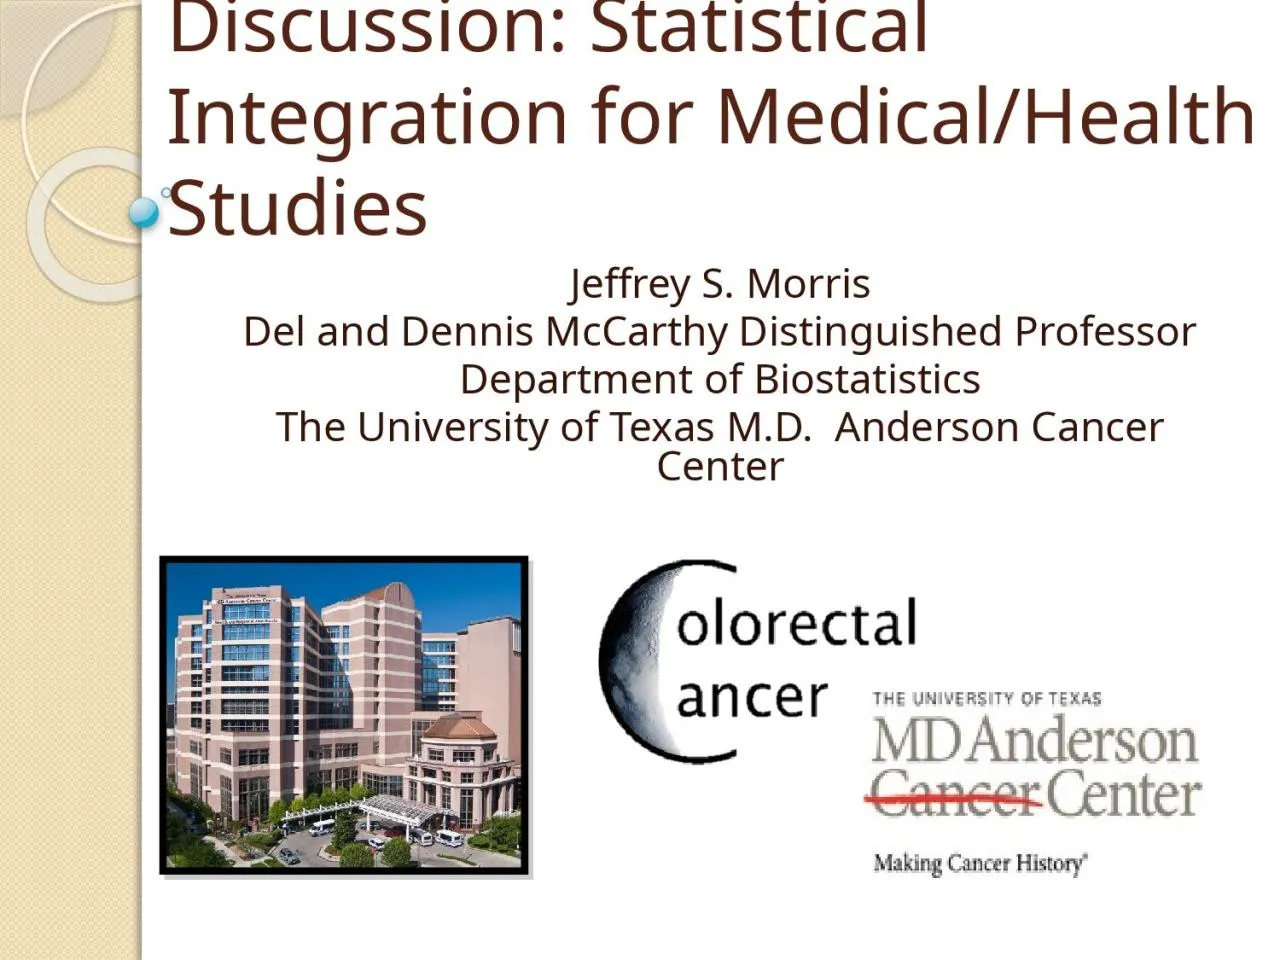 Discussion: Statistical Integration for Medical/Health Studies